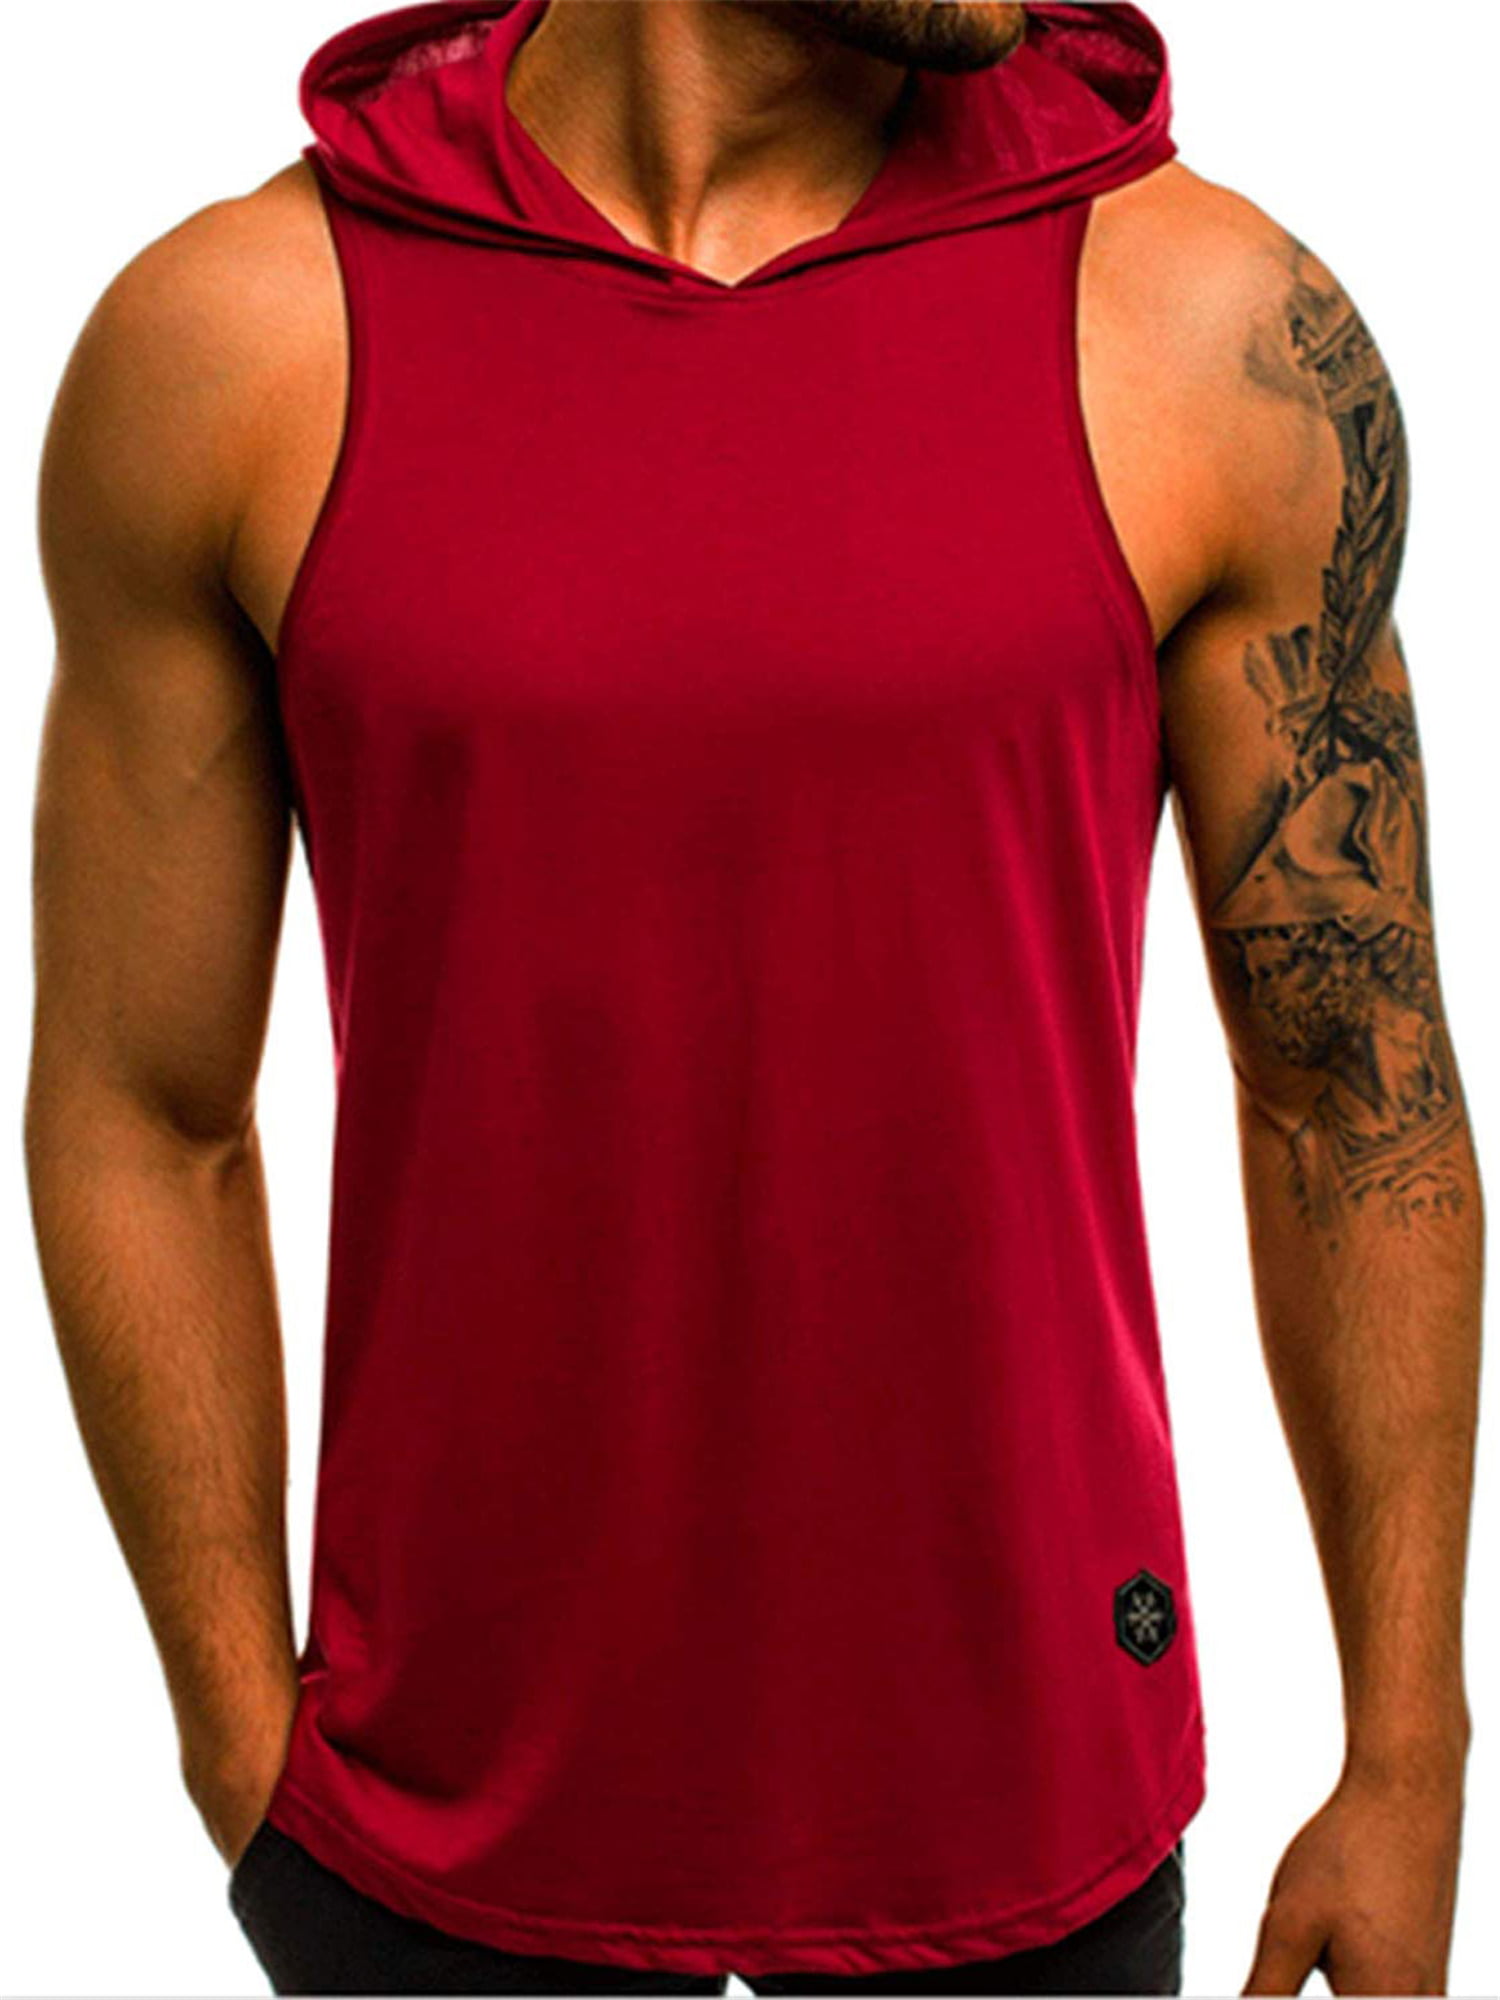 COOFANDY Mens 2 Pack Workout Hooded Tank Tops Bodybuilding Muscle Cut Off T Shirt Sleeveless Gym Hoodies